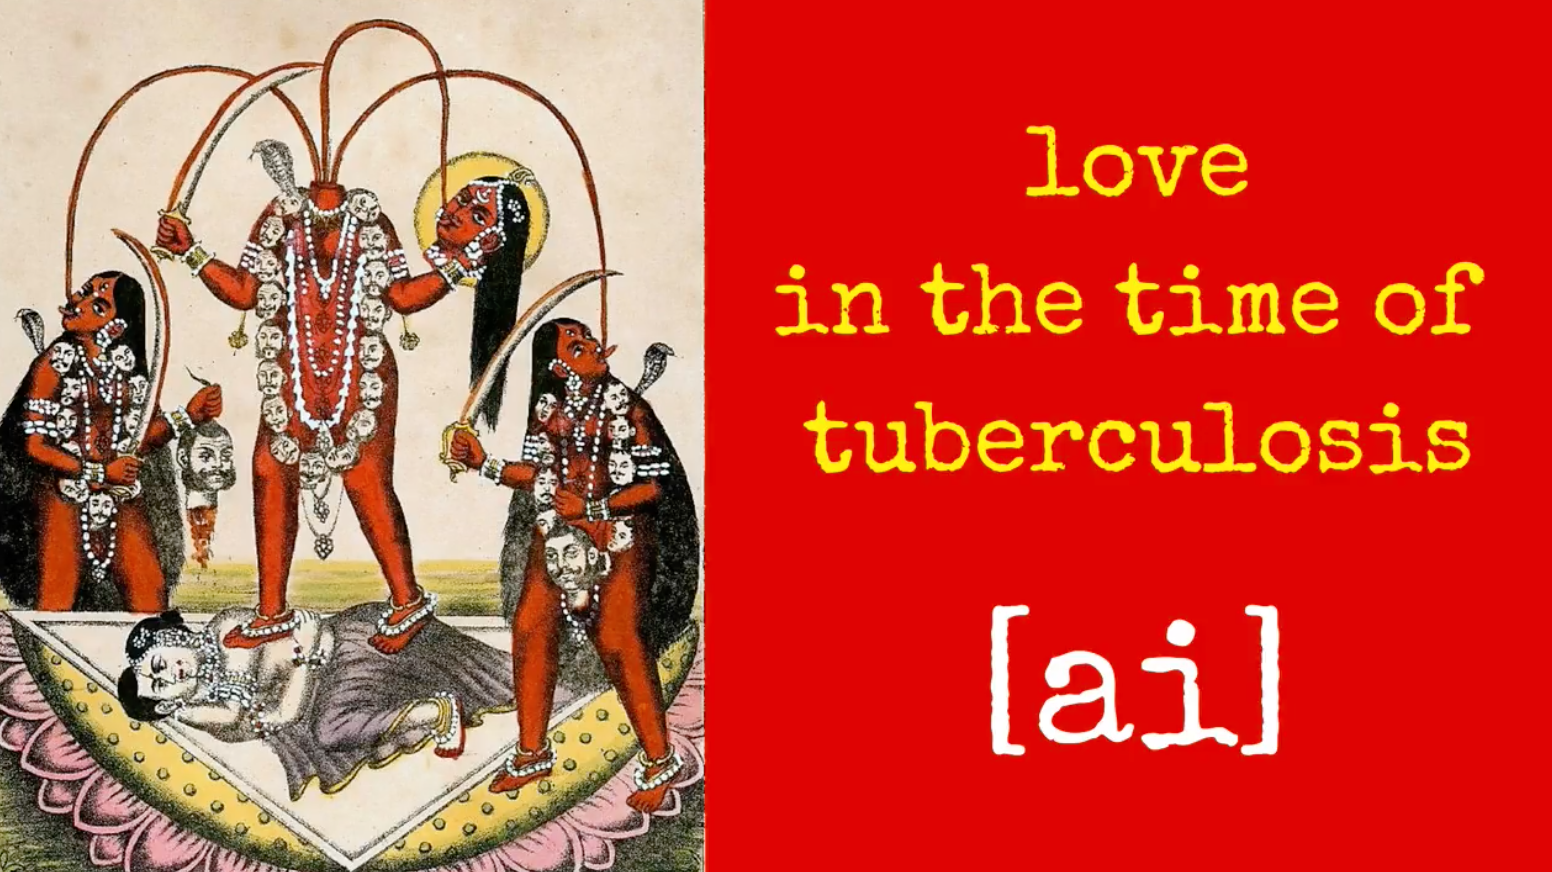 Singer-songwriter [ai] has released their archaically infectious serenade, ‘Love in the Time of Tuberculosis’.